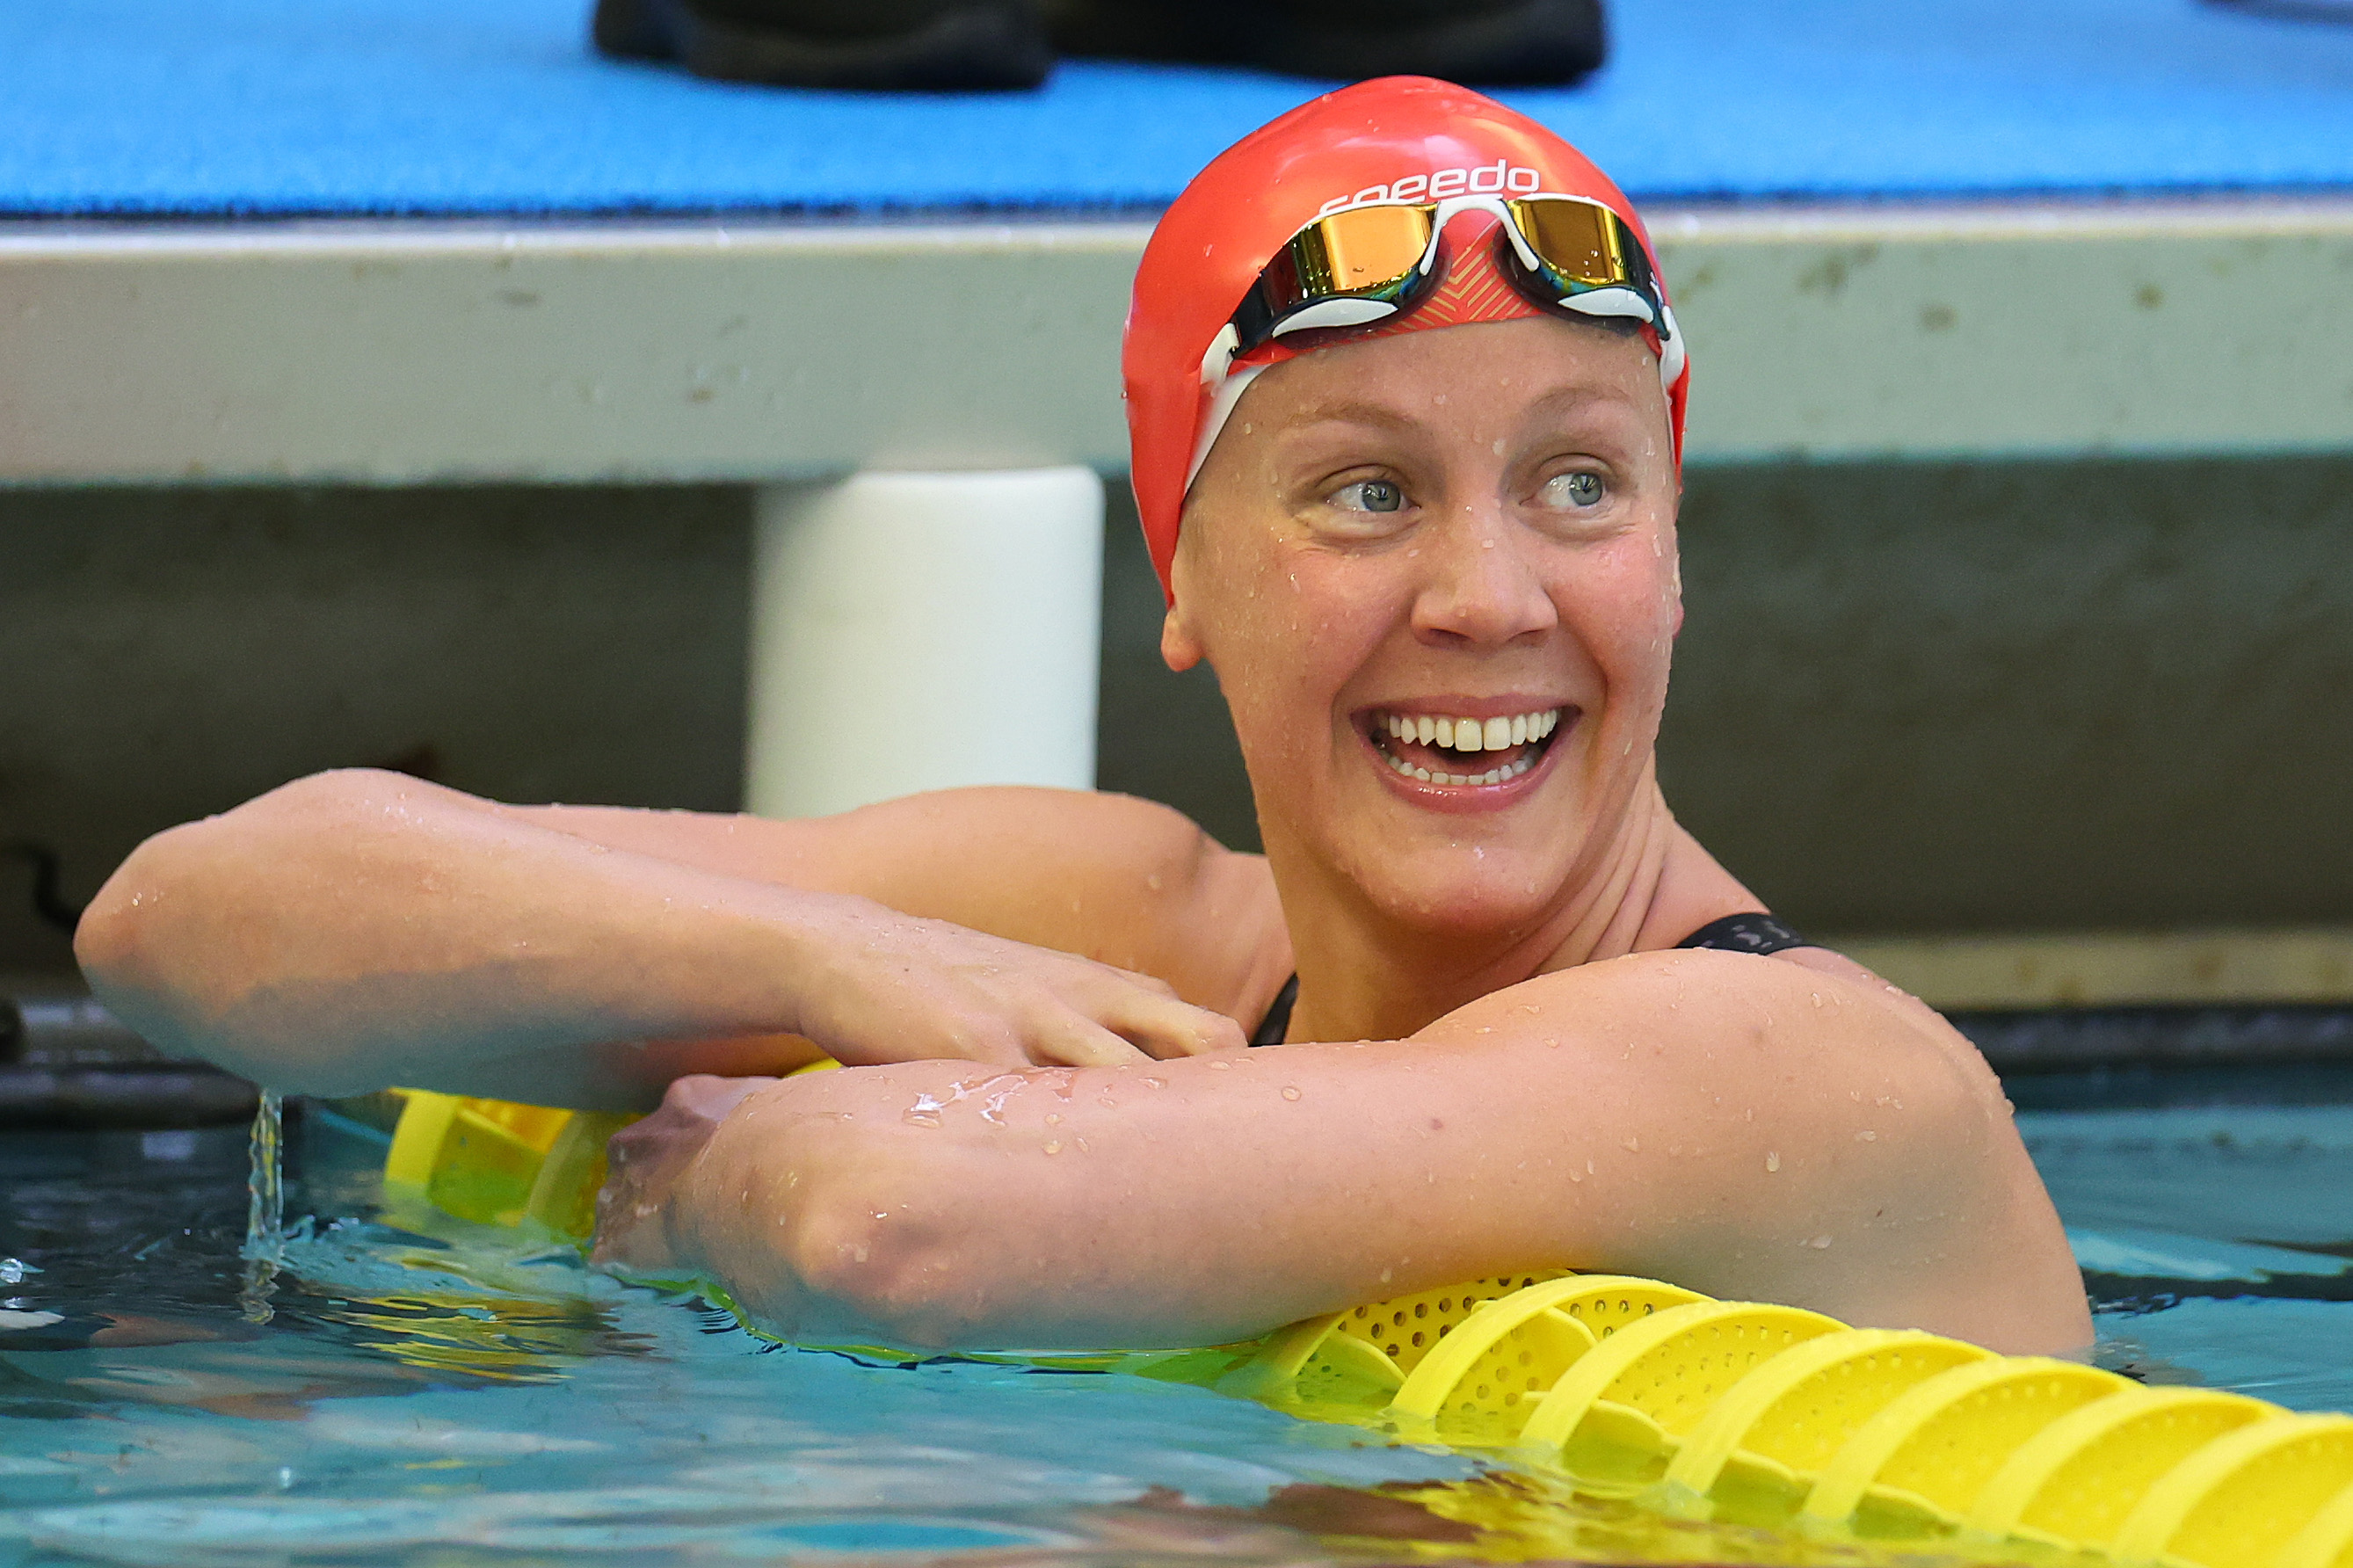 5-time medalist Mallory Weggemann swims at Paralympic Games for first time as mother